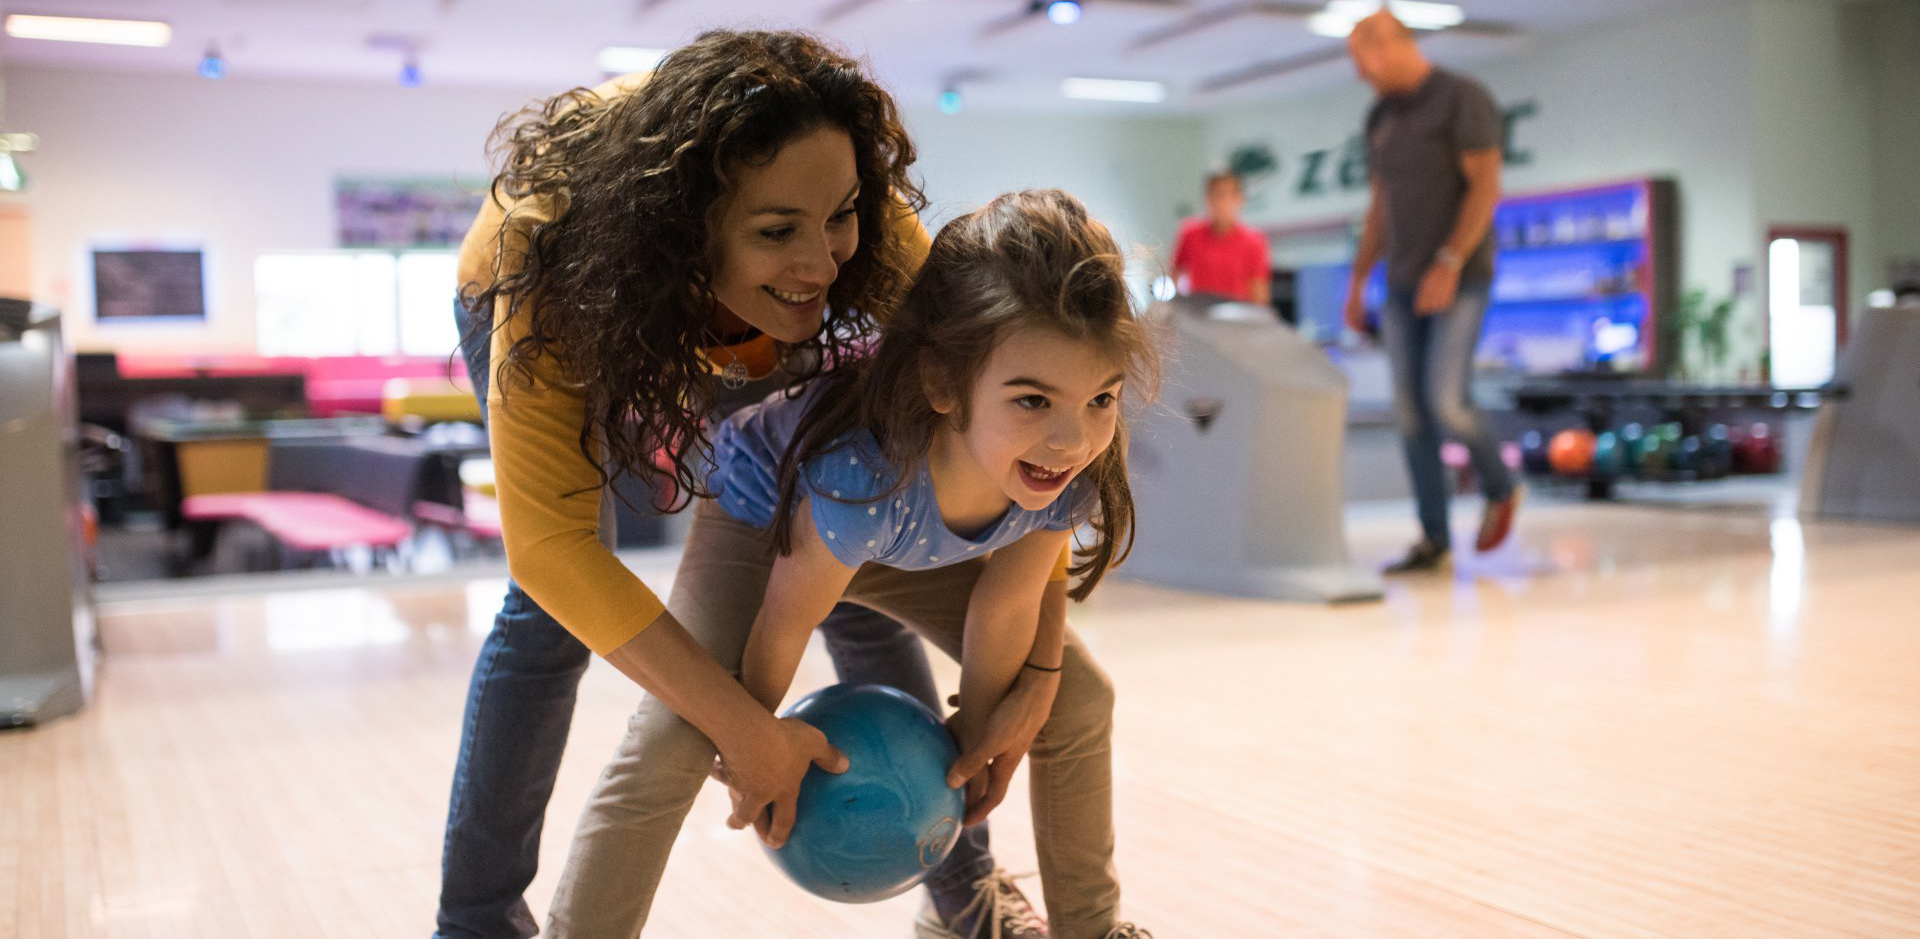 A woman and a little girl are bowling together at a bowling alley.